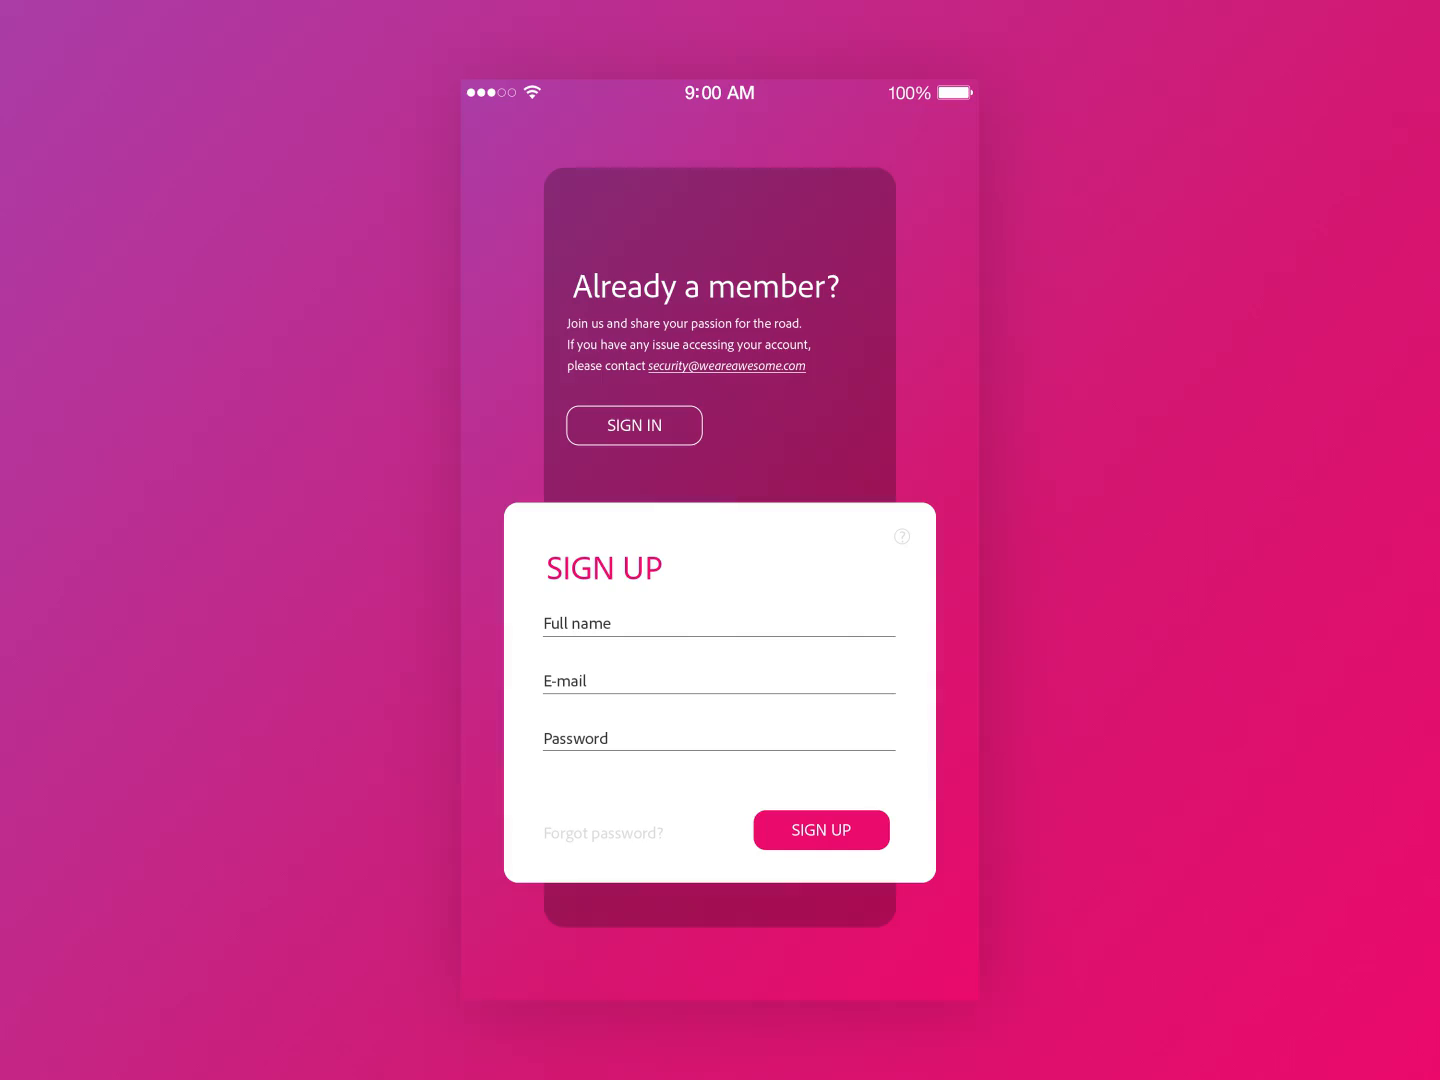 Sign in / Sign up by Hitesh lakhyani 🚀 on Dribbble